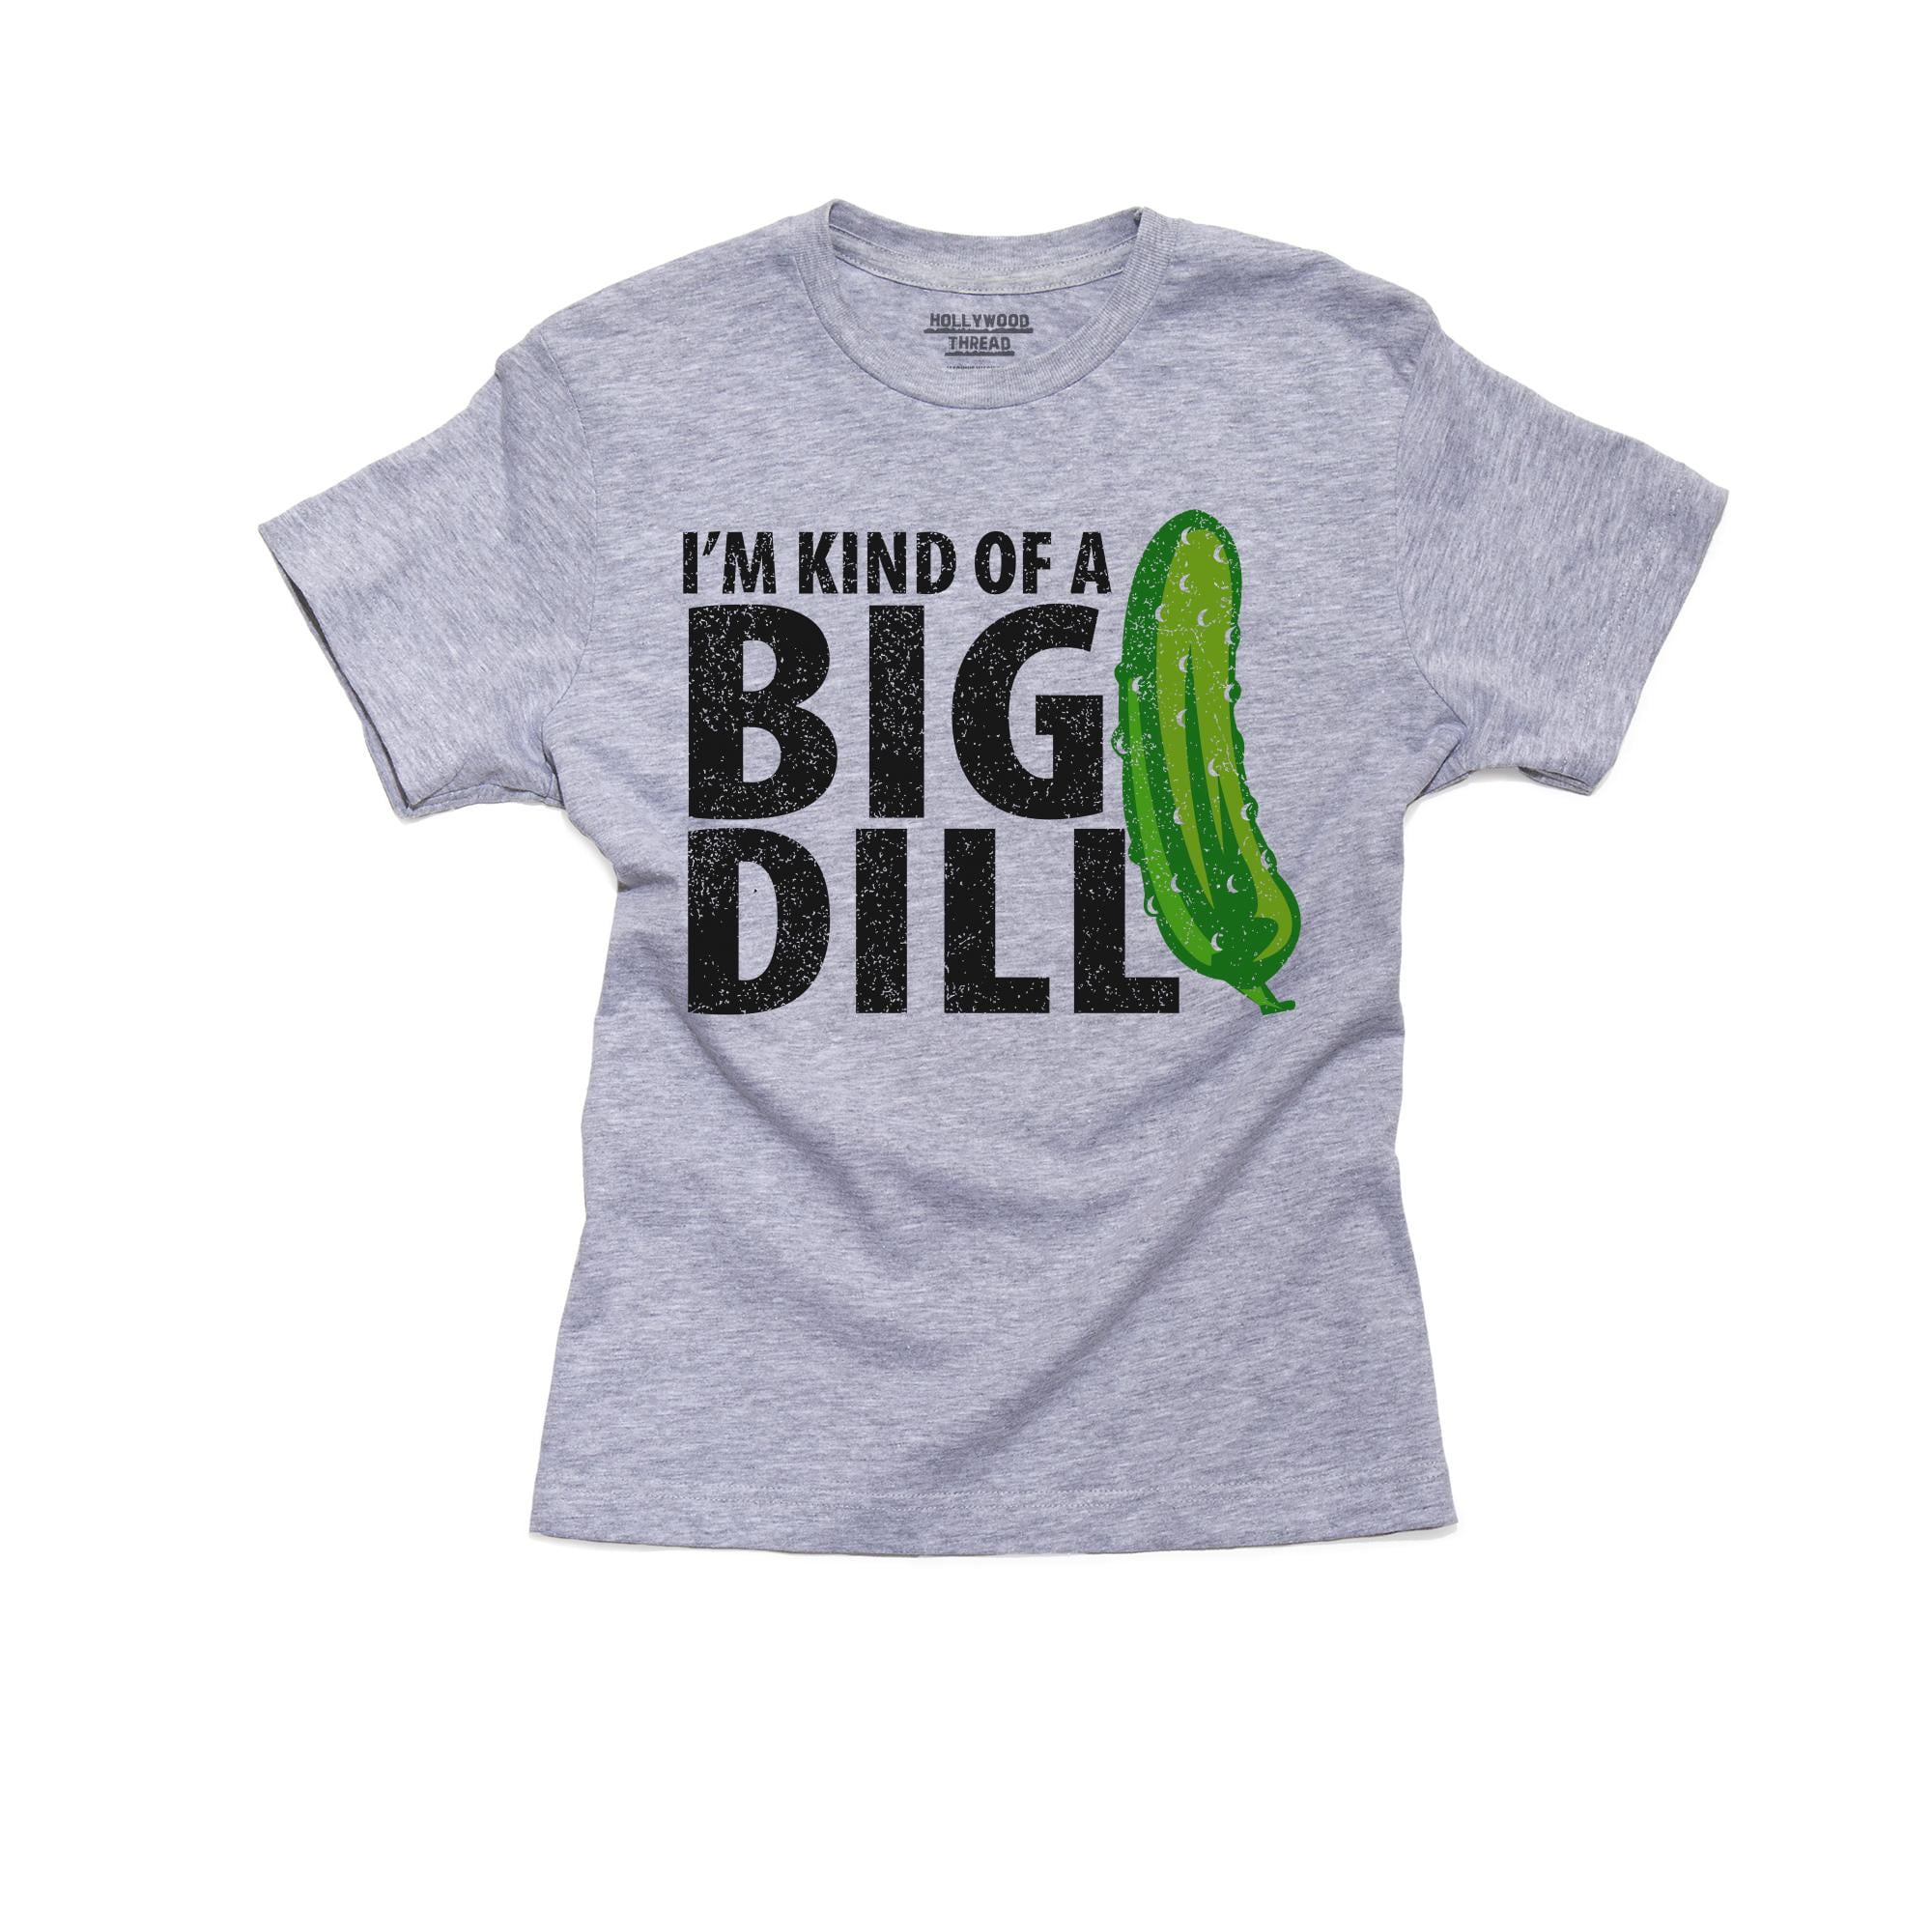 Dill Pickle Shirt Pickle Shirt Pickle Gift Pickle Duct Taped To Shirt Pickle Lover Unisex Long Sleeve Shirt Pickle Humor Shirt,